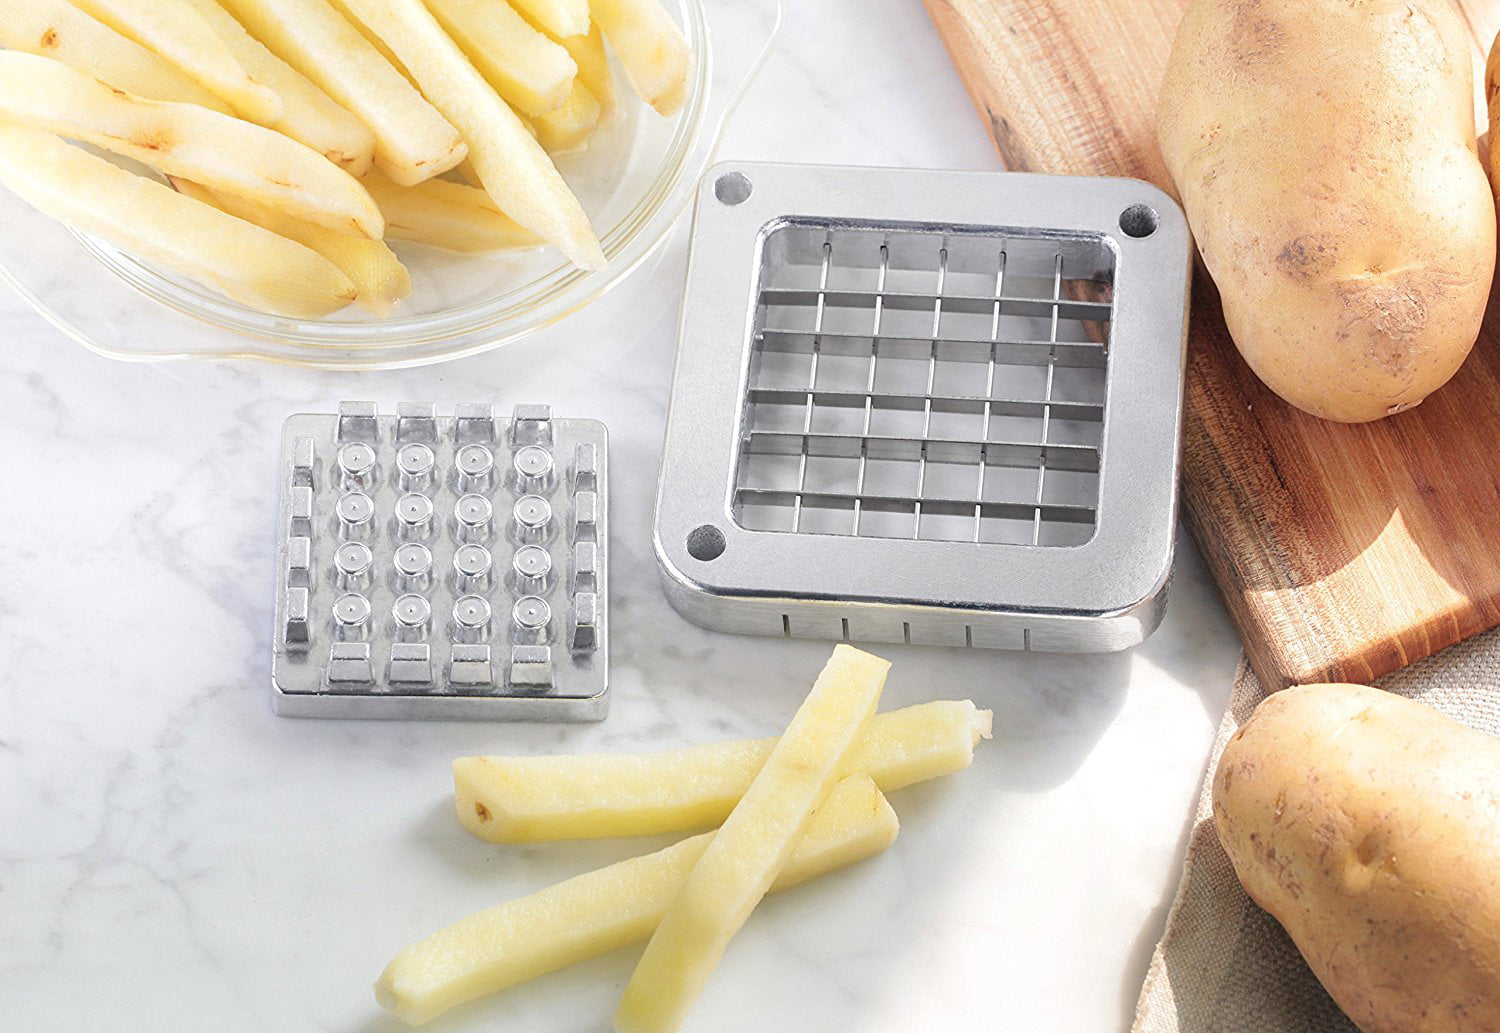 New Star Food Service Commercial Grade French Fry Cutter & Reviews